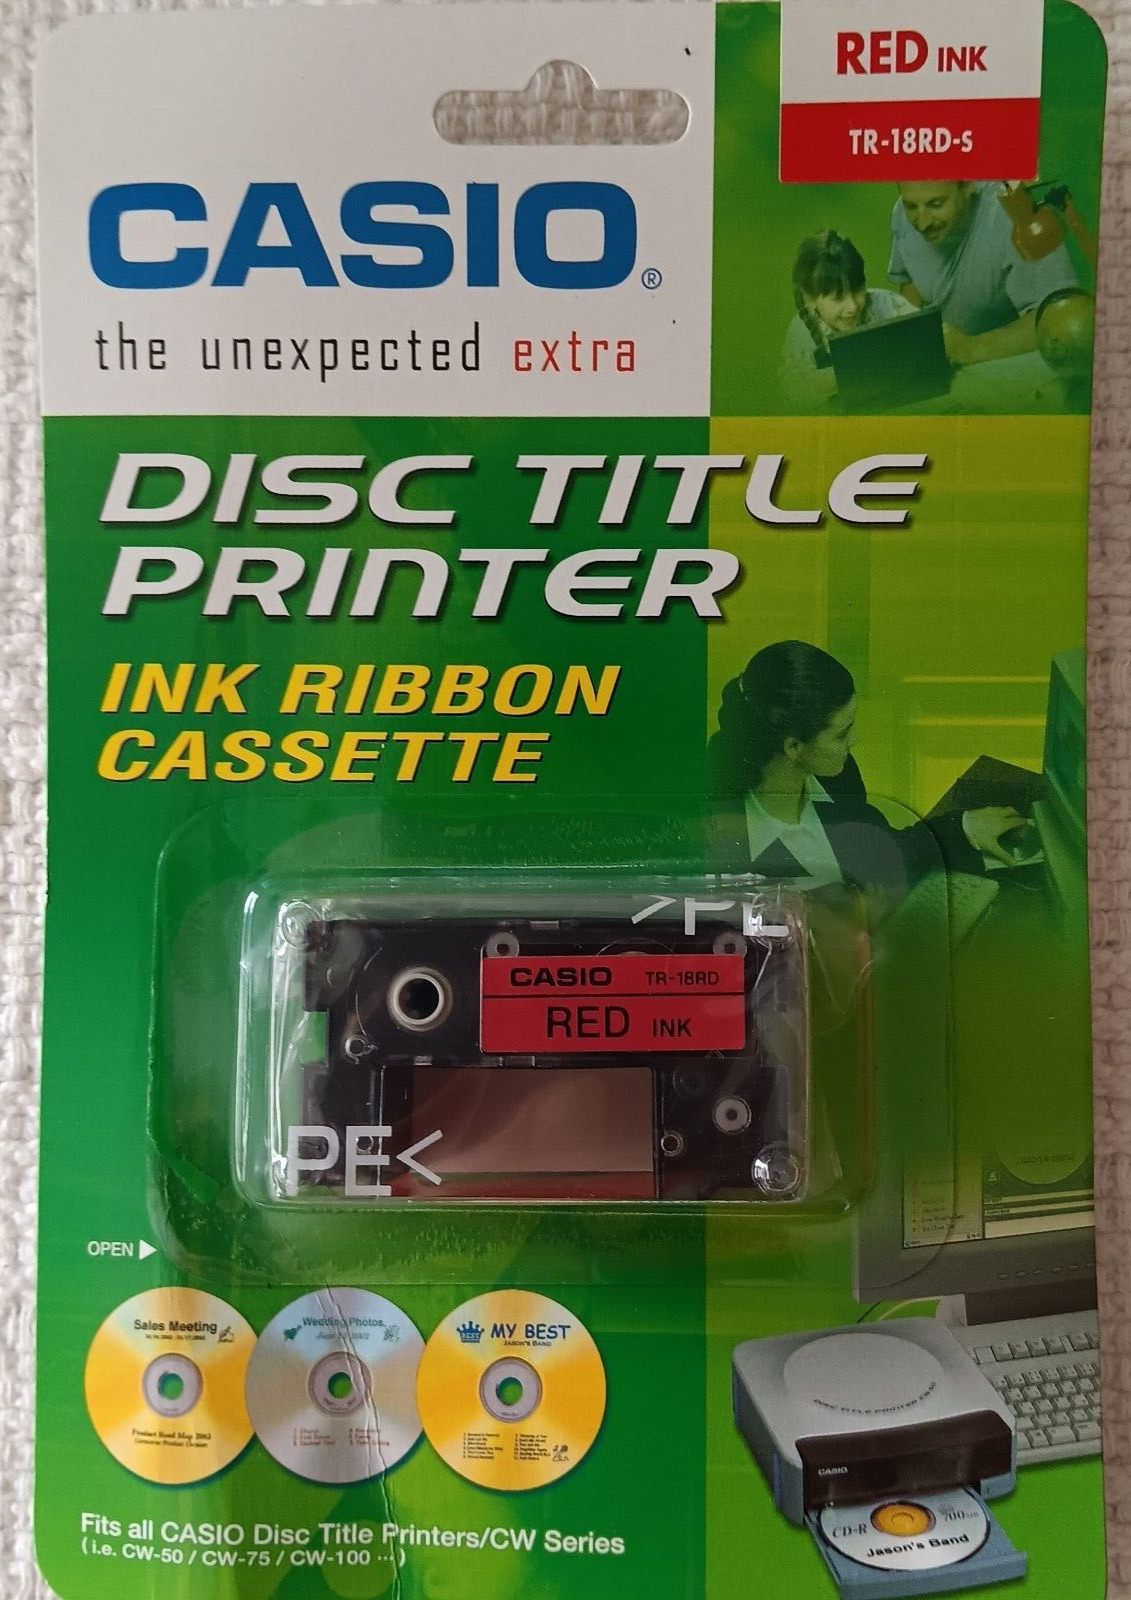 Casio Disc Title Printer CW-100 Ink Ribbon Cassette Red Ink TR-18RD-s